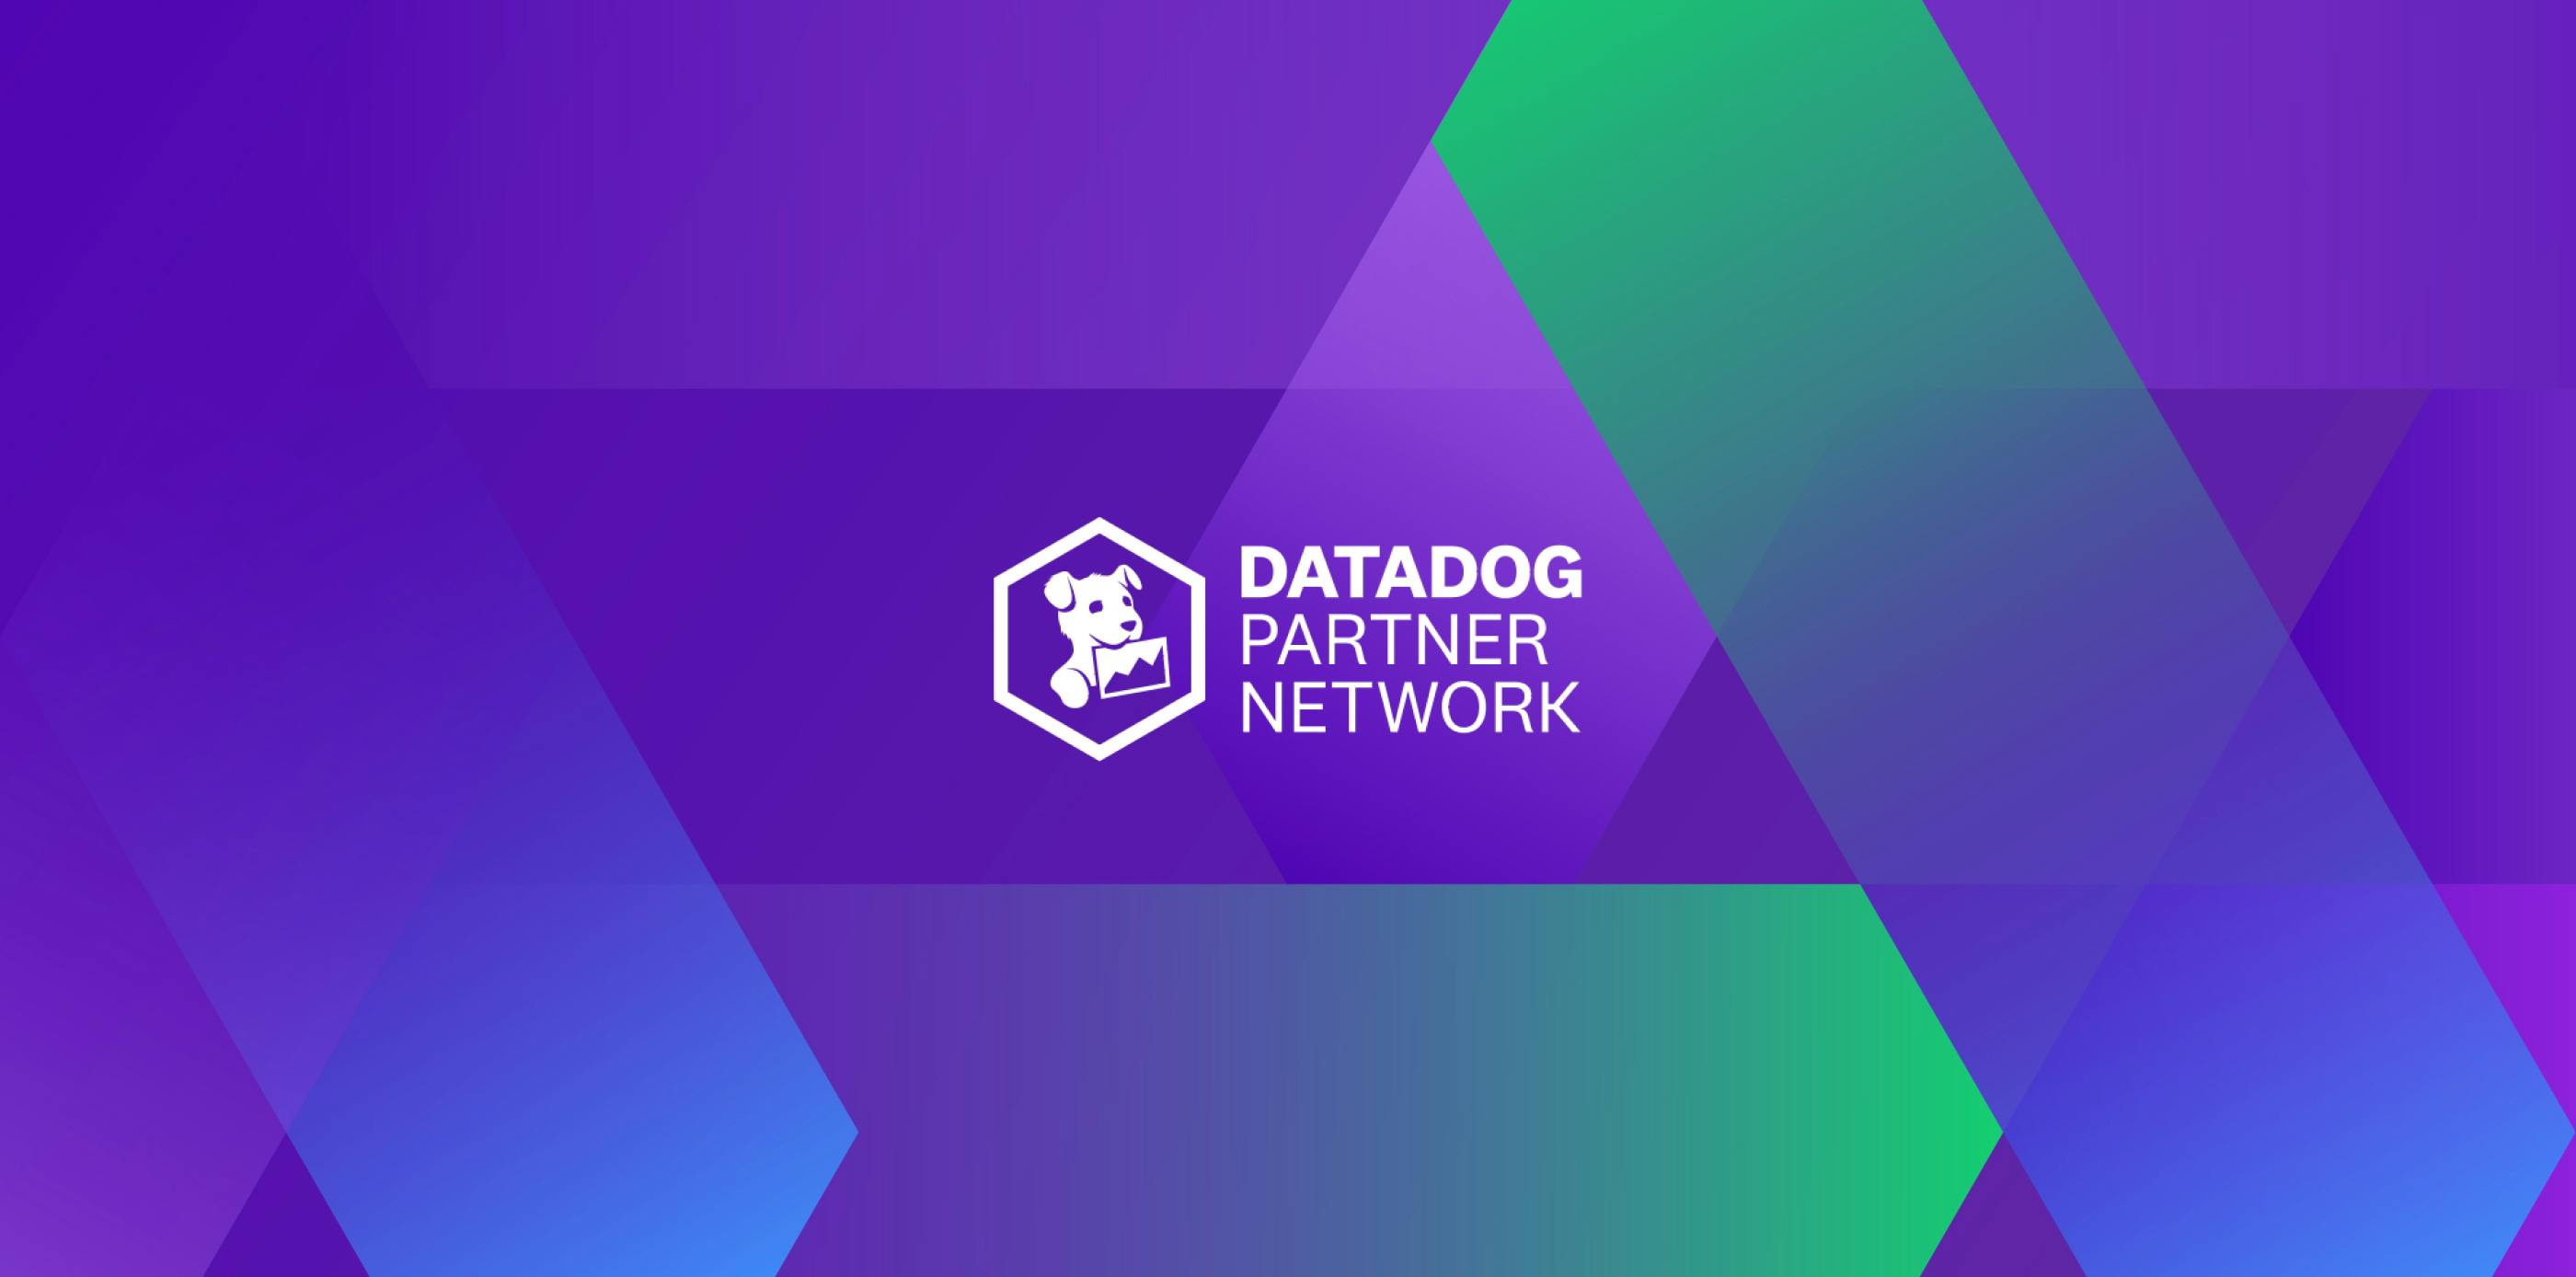 Datadog Partner Network logo in white on a purple, blue and green abstract background.